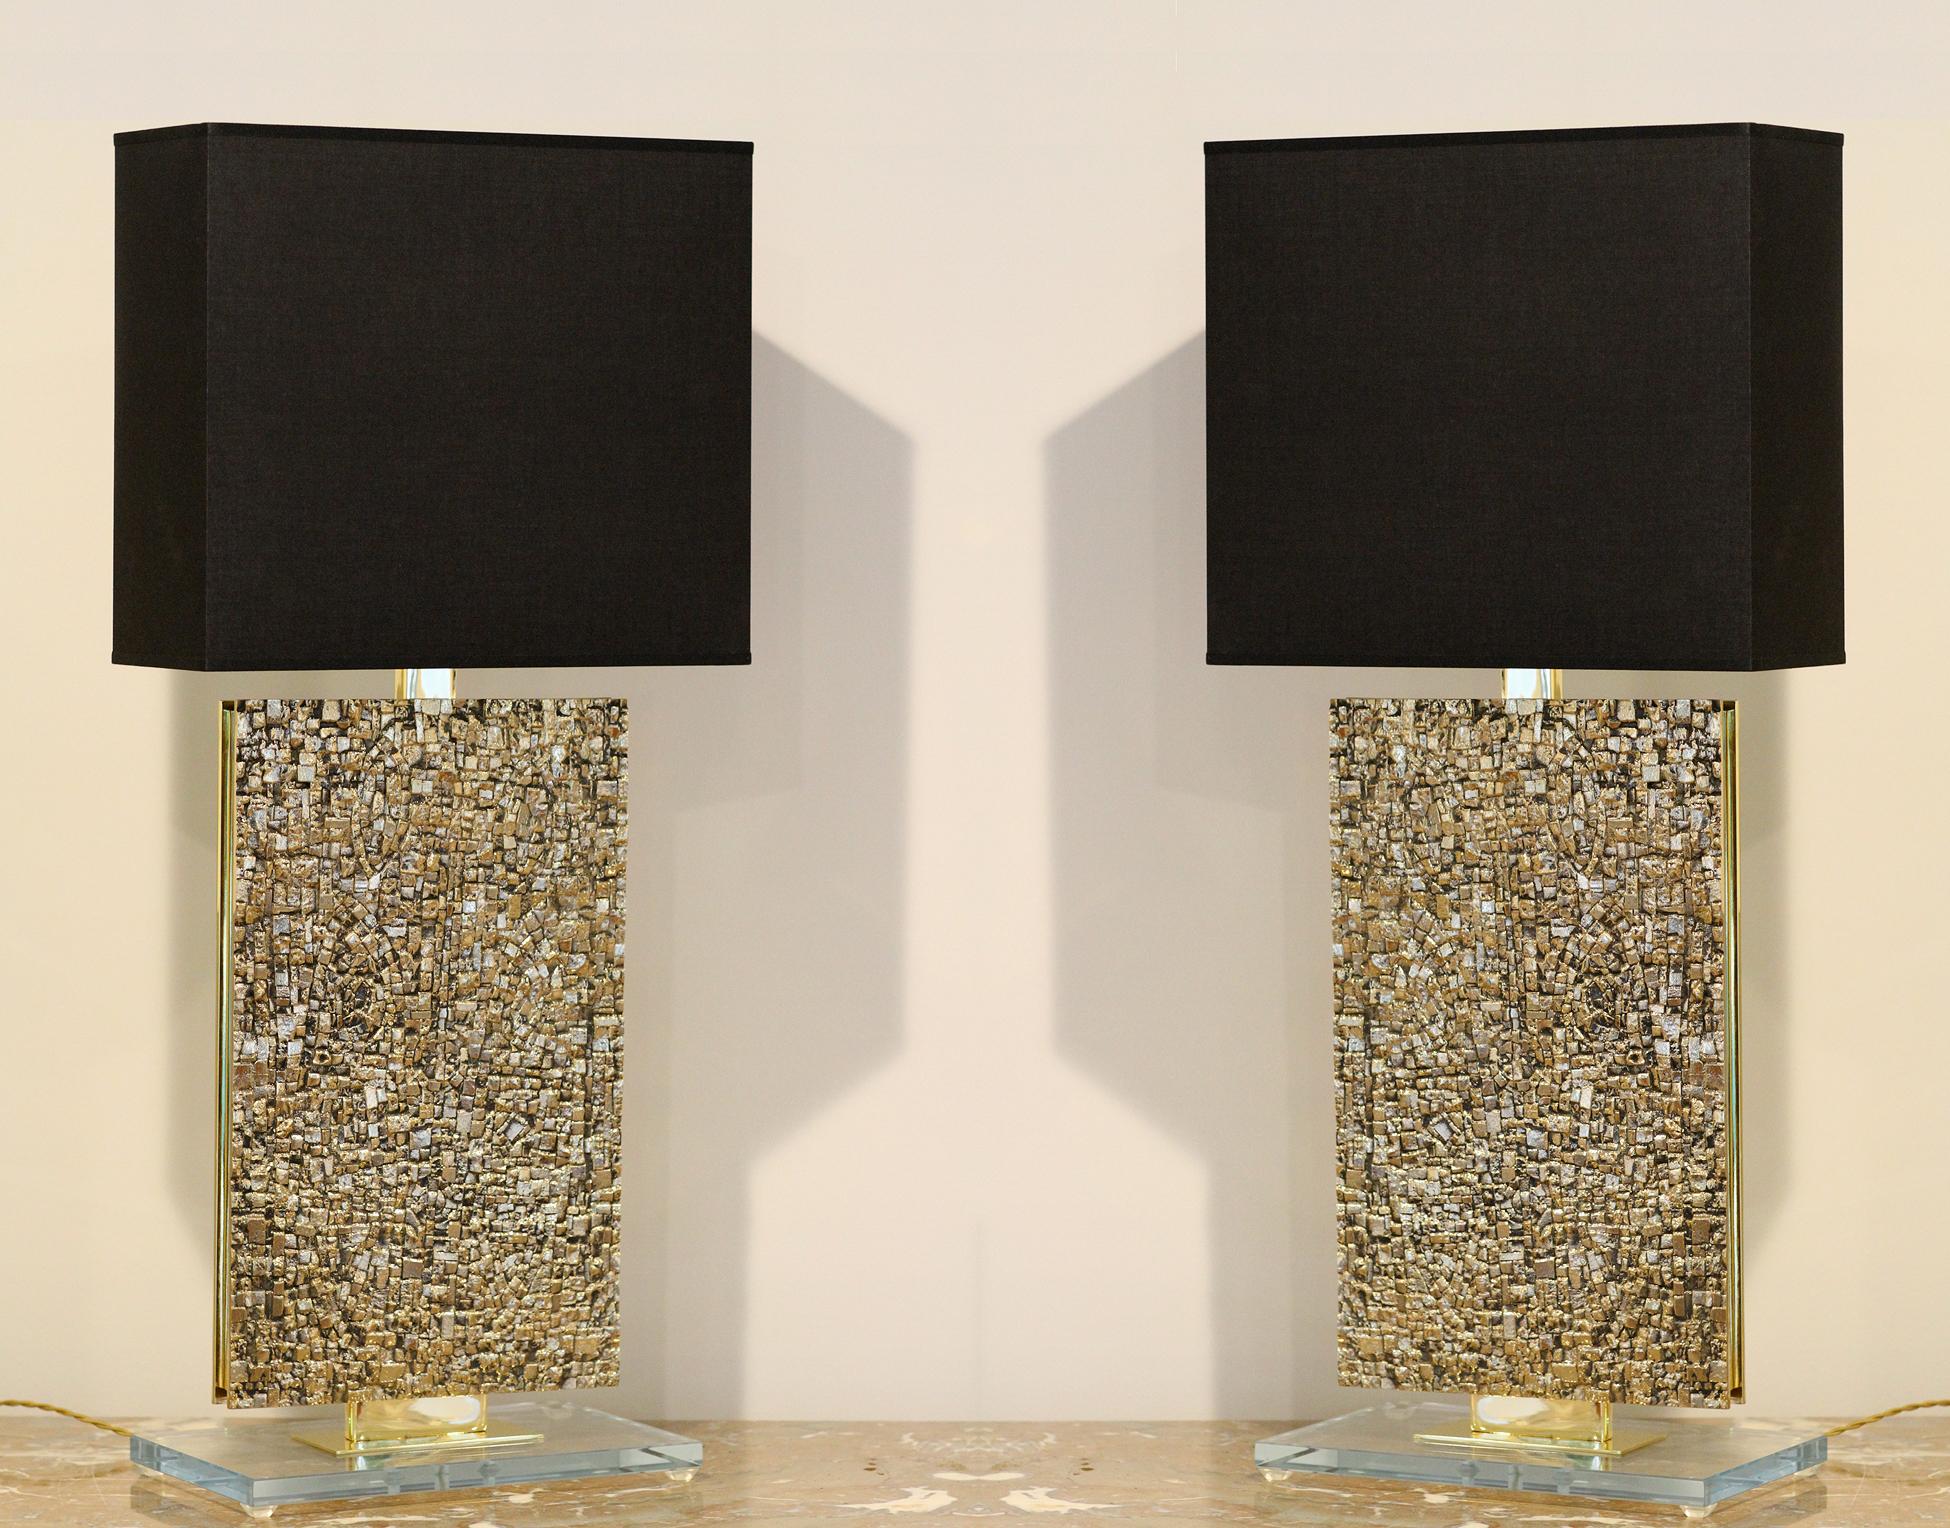 Model PM3
Important and impressive pair of table lamps
Bronze plate mounted on brass or gilt metal frame. Base in 3/4